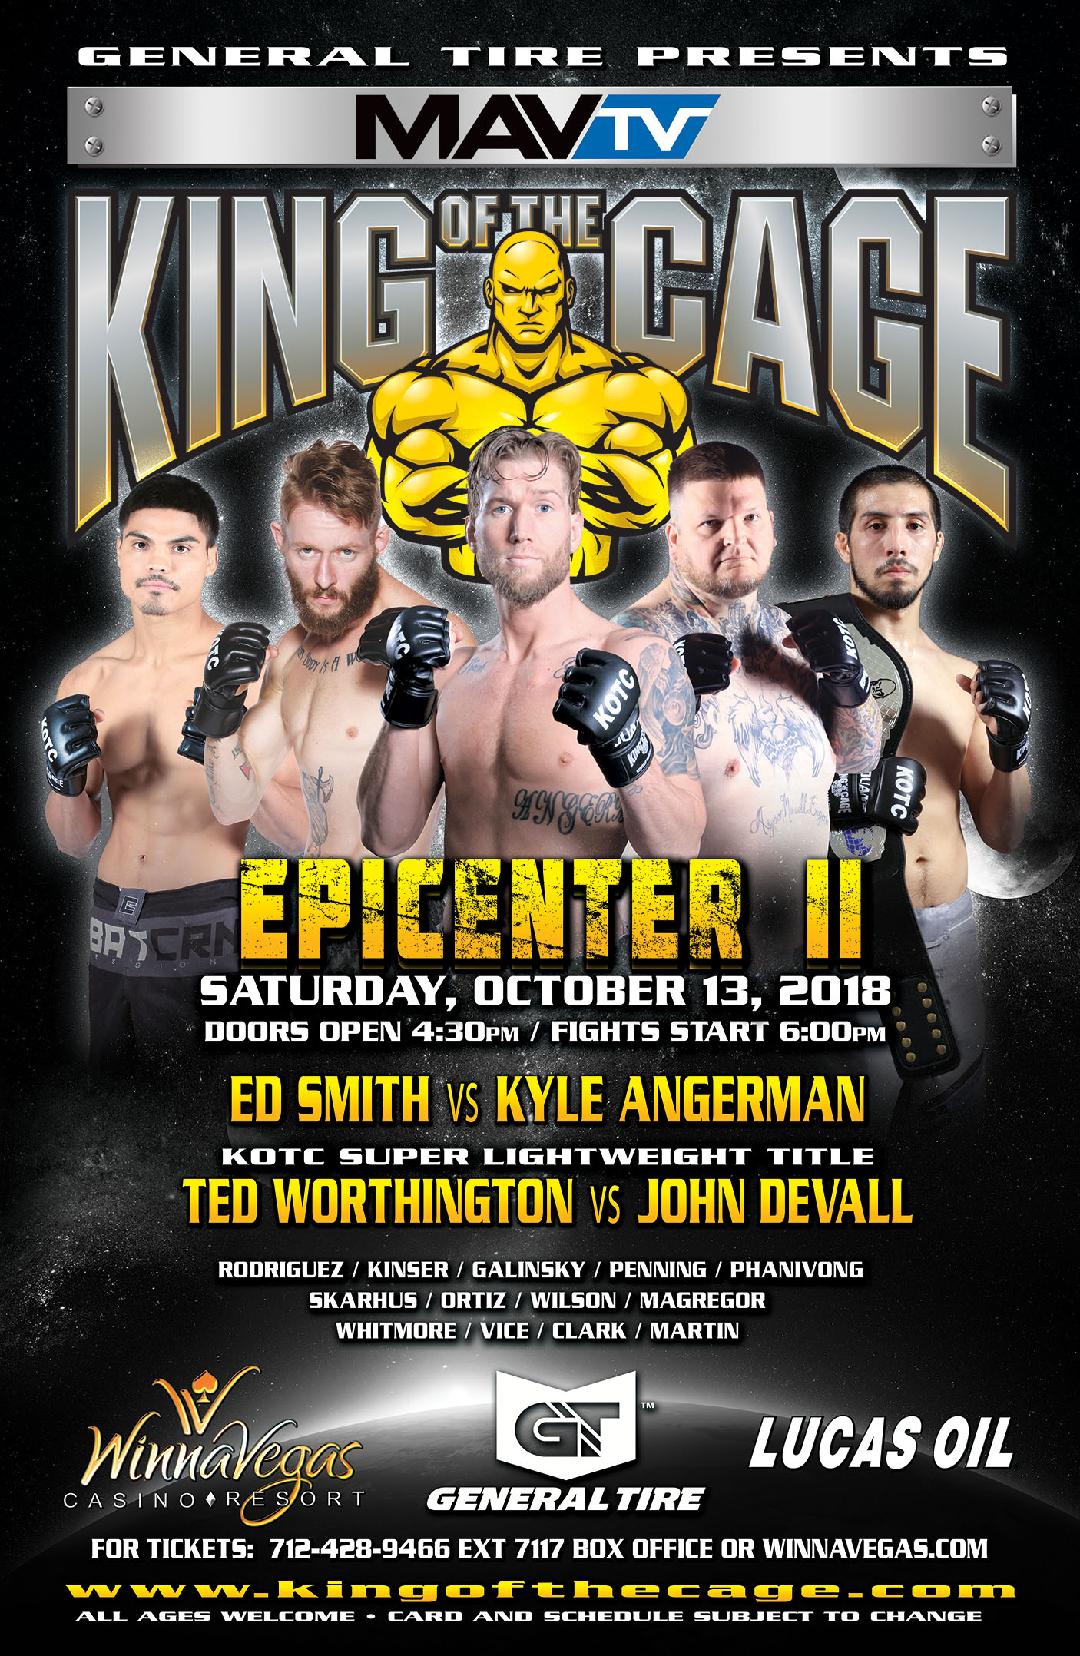 King of the Cage Returns to WinnaVegas Casino Resort on October 13 for “EPICENTER II”